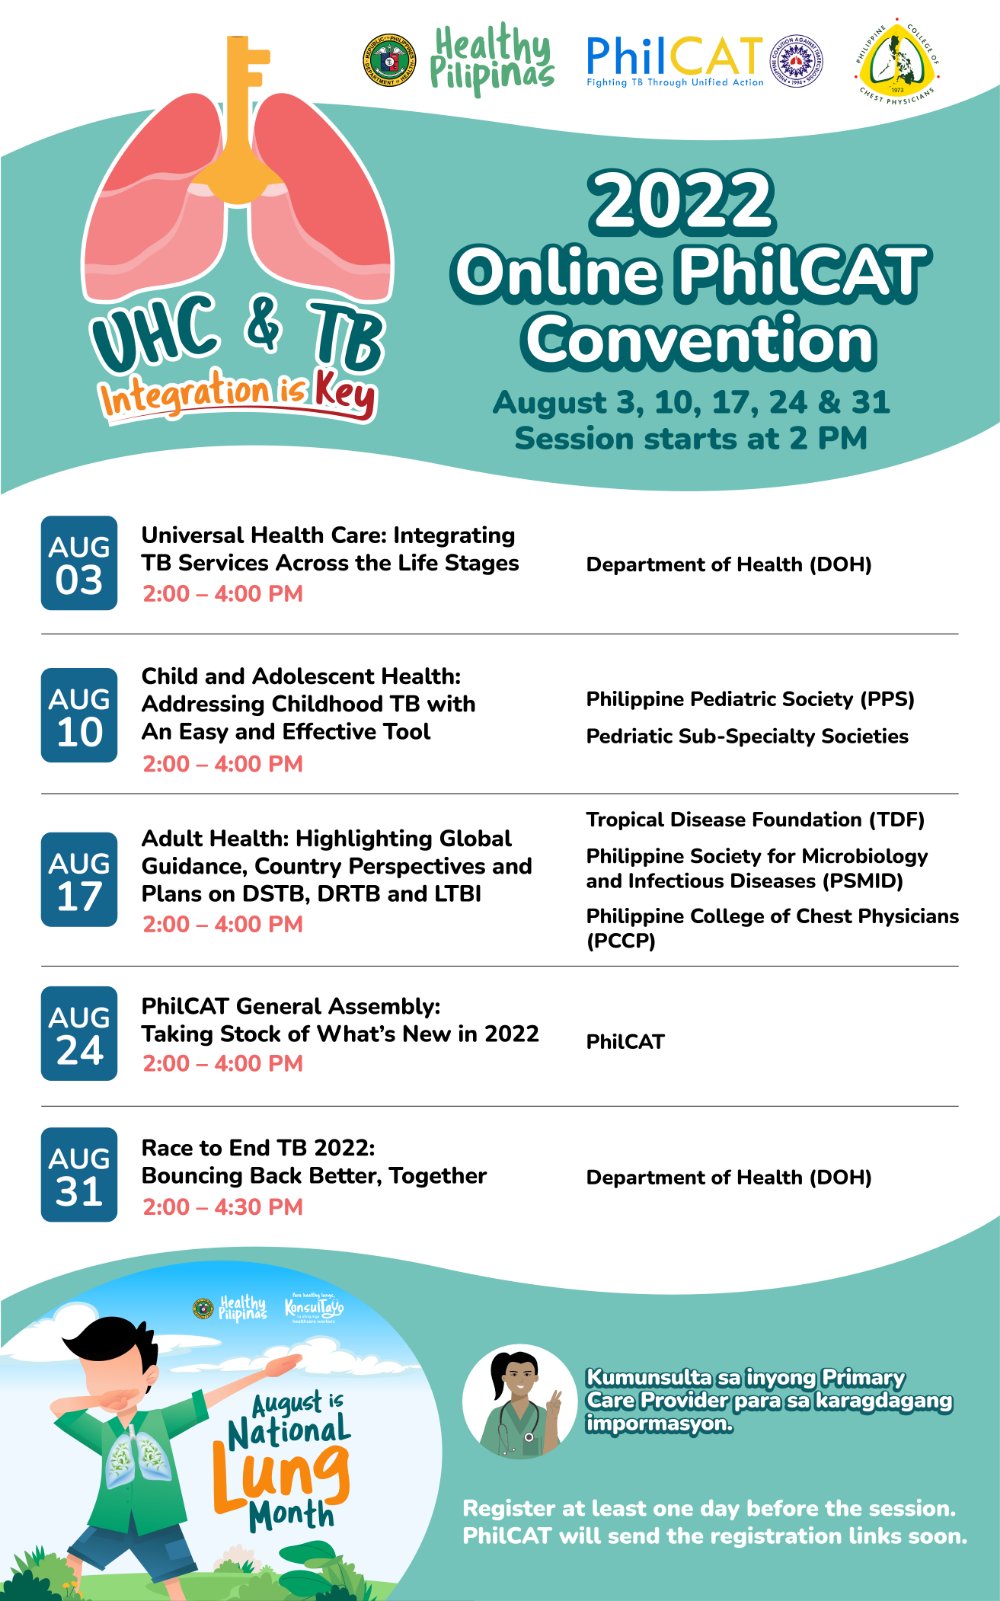 Universal Health Care (UHC) and TB: Integration is Key